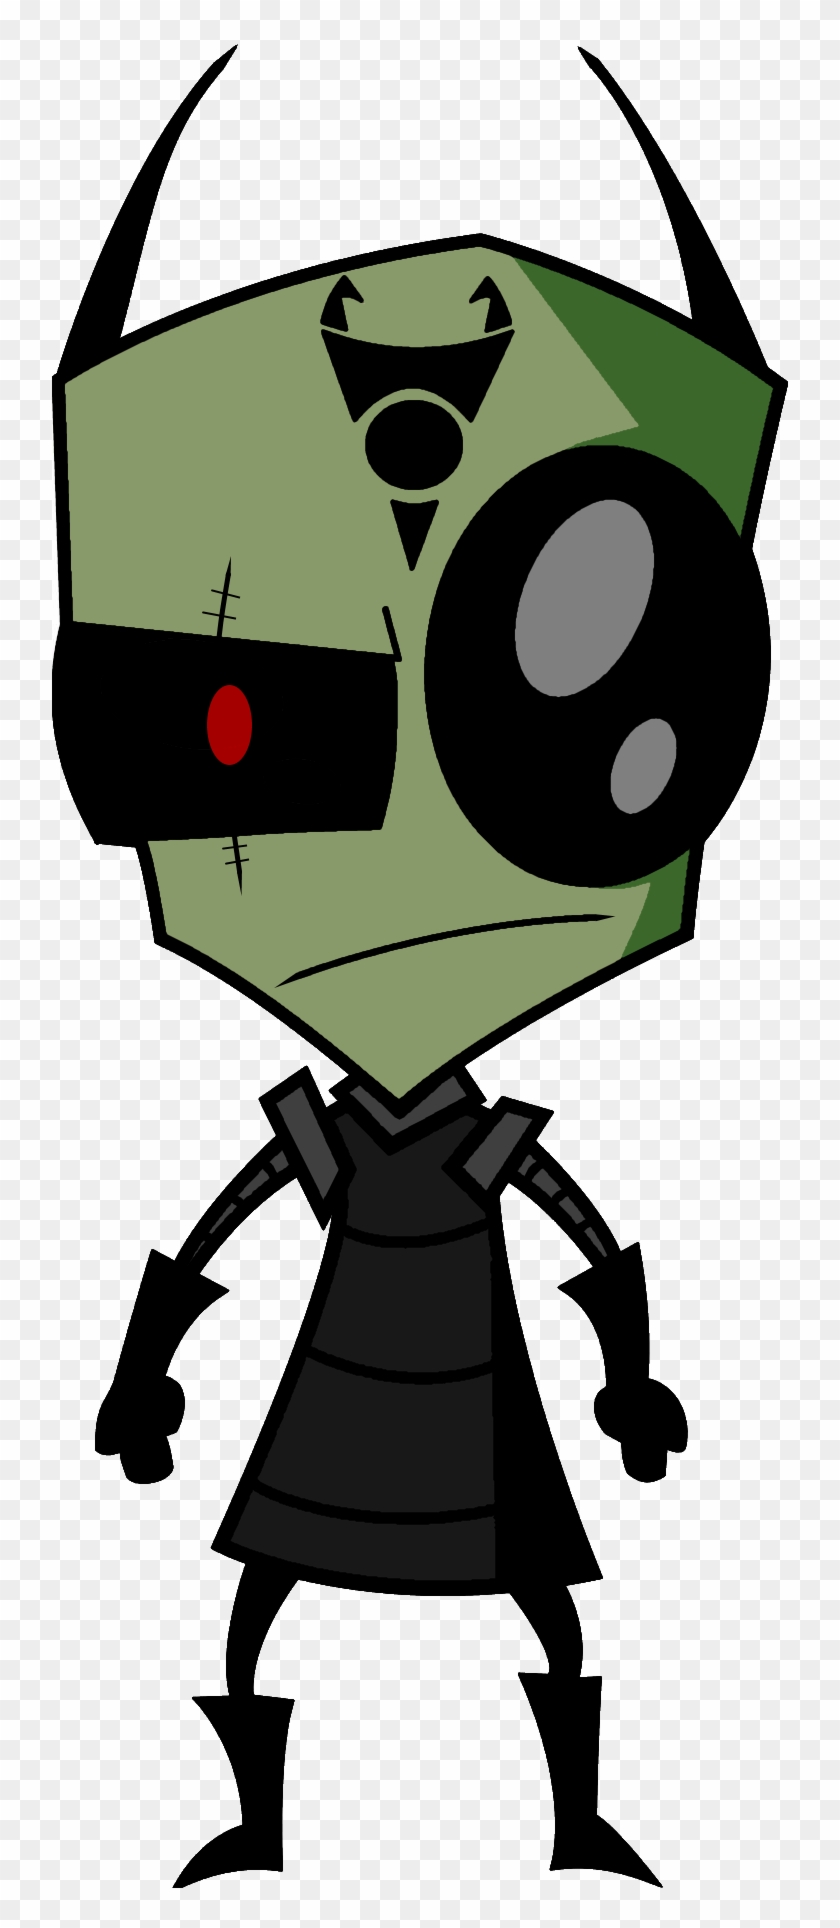 Krak By 6the6overlord6 - Zim From Invader Zim #659271